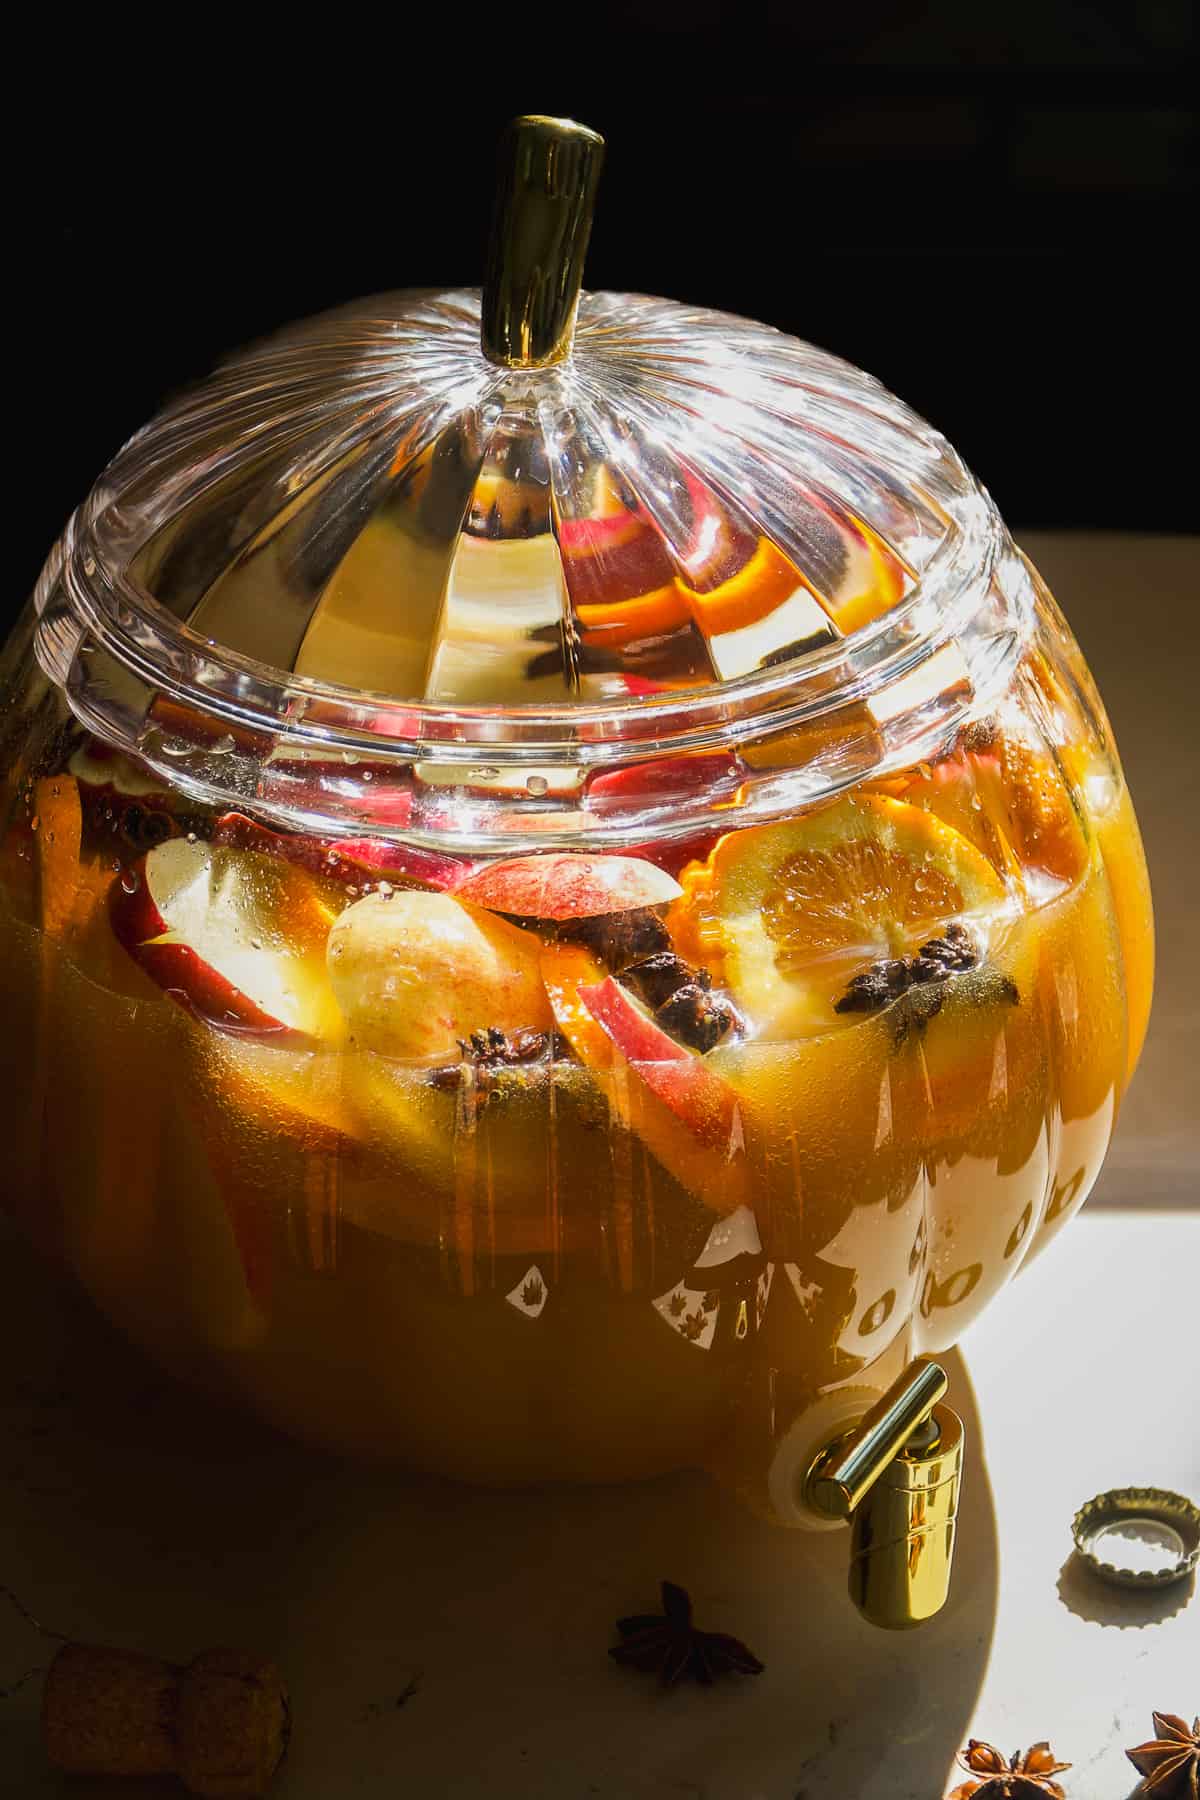 Pumpkin punch bowl with spiked apple cider.